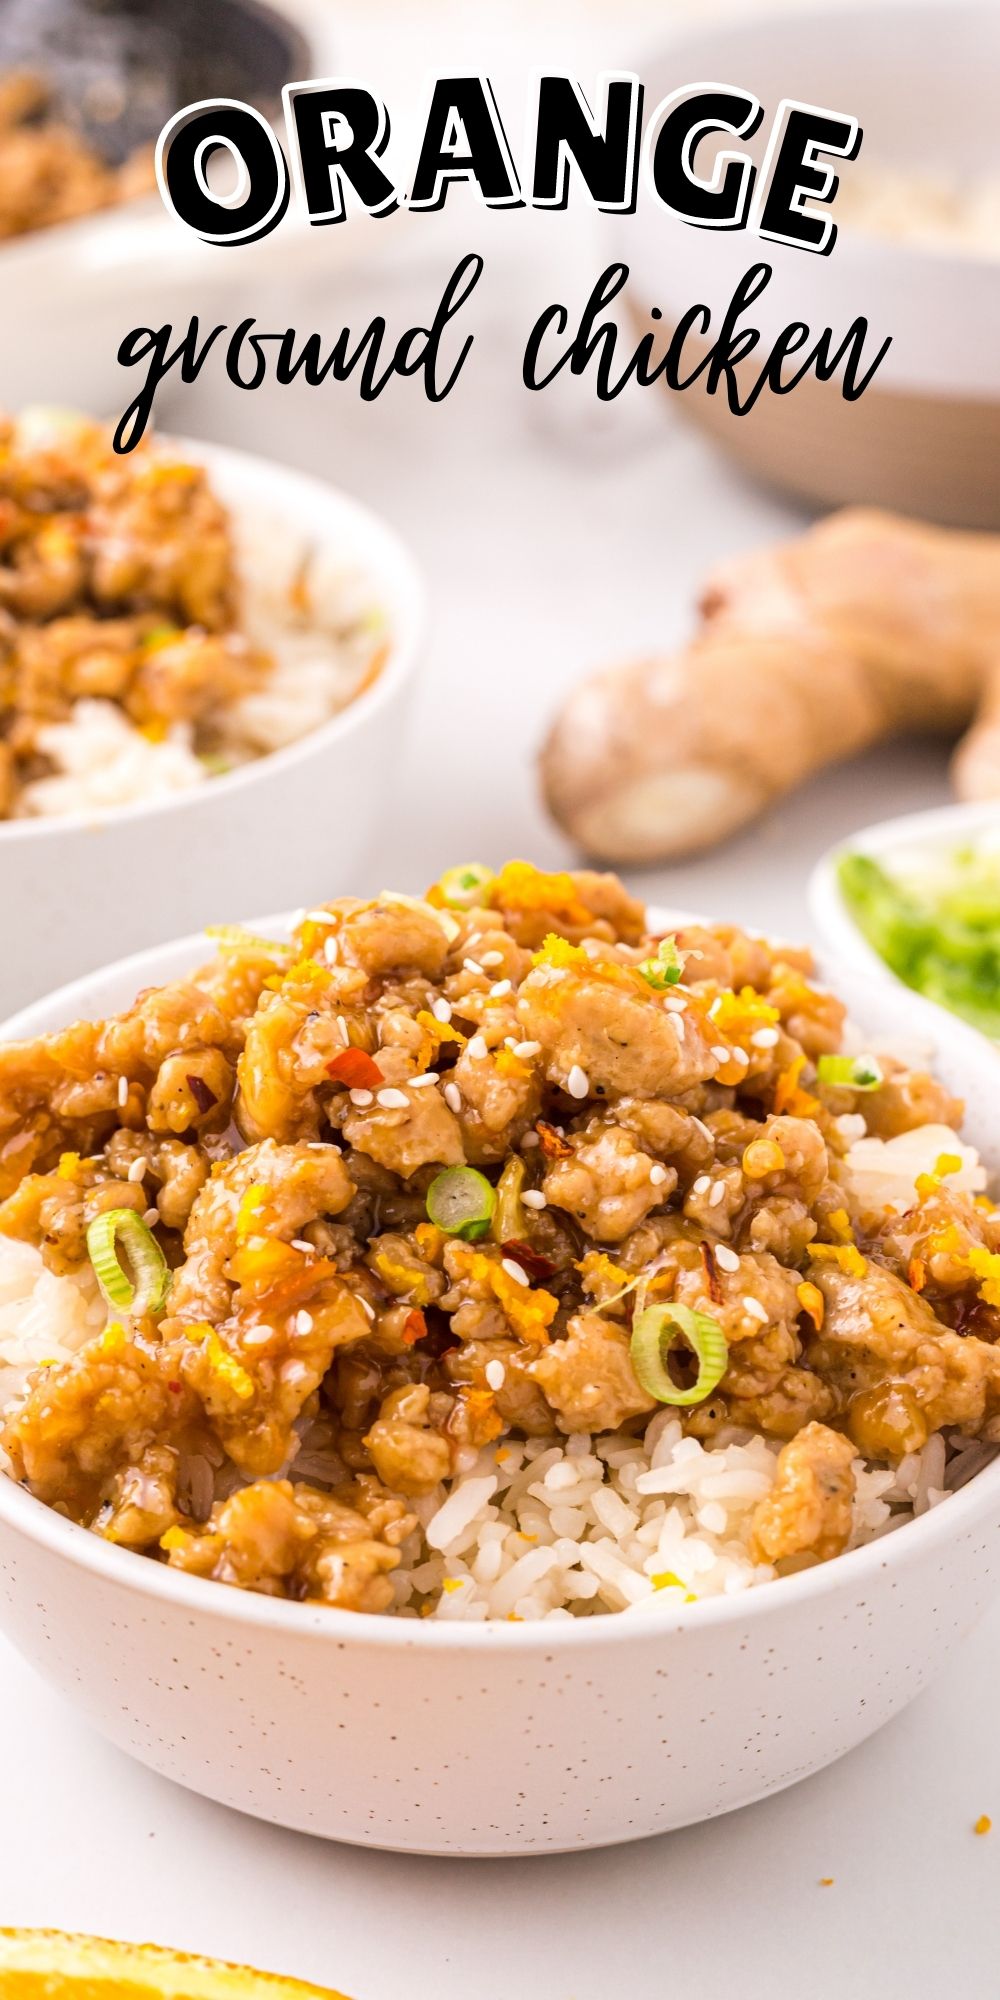 This orange ground chicken recipe is packed with flavor, and you won’t even miss the fried chicken of the tradition take-out dish. via @familyfresh